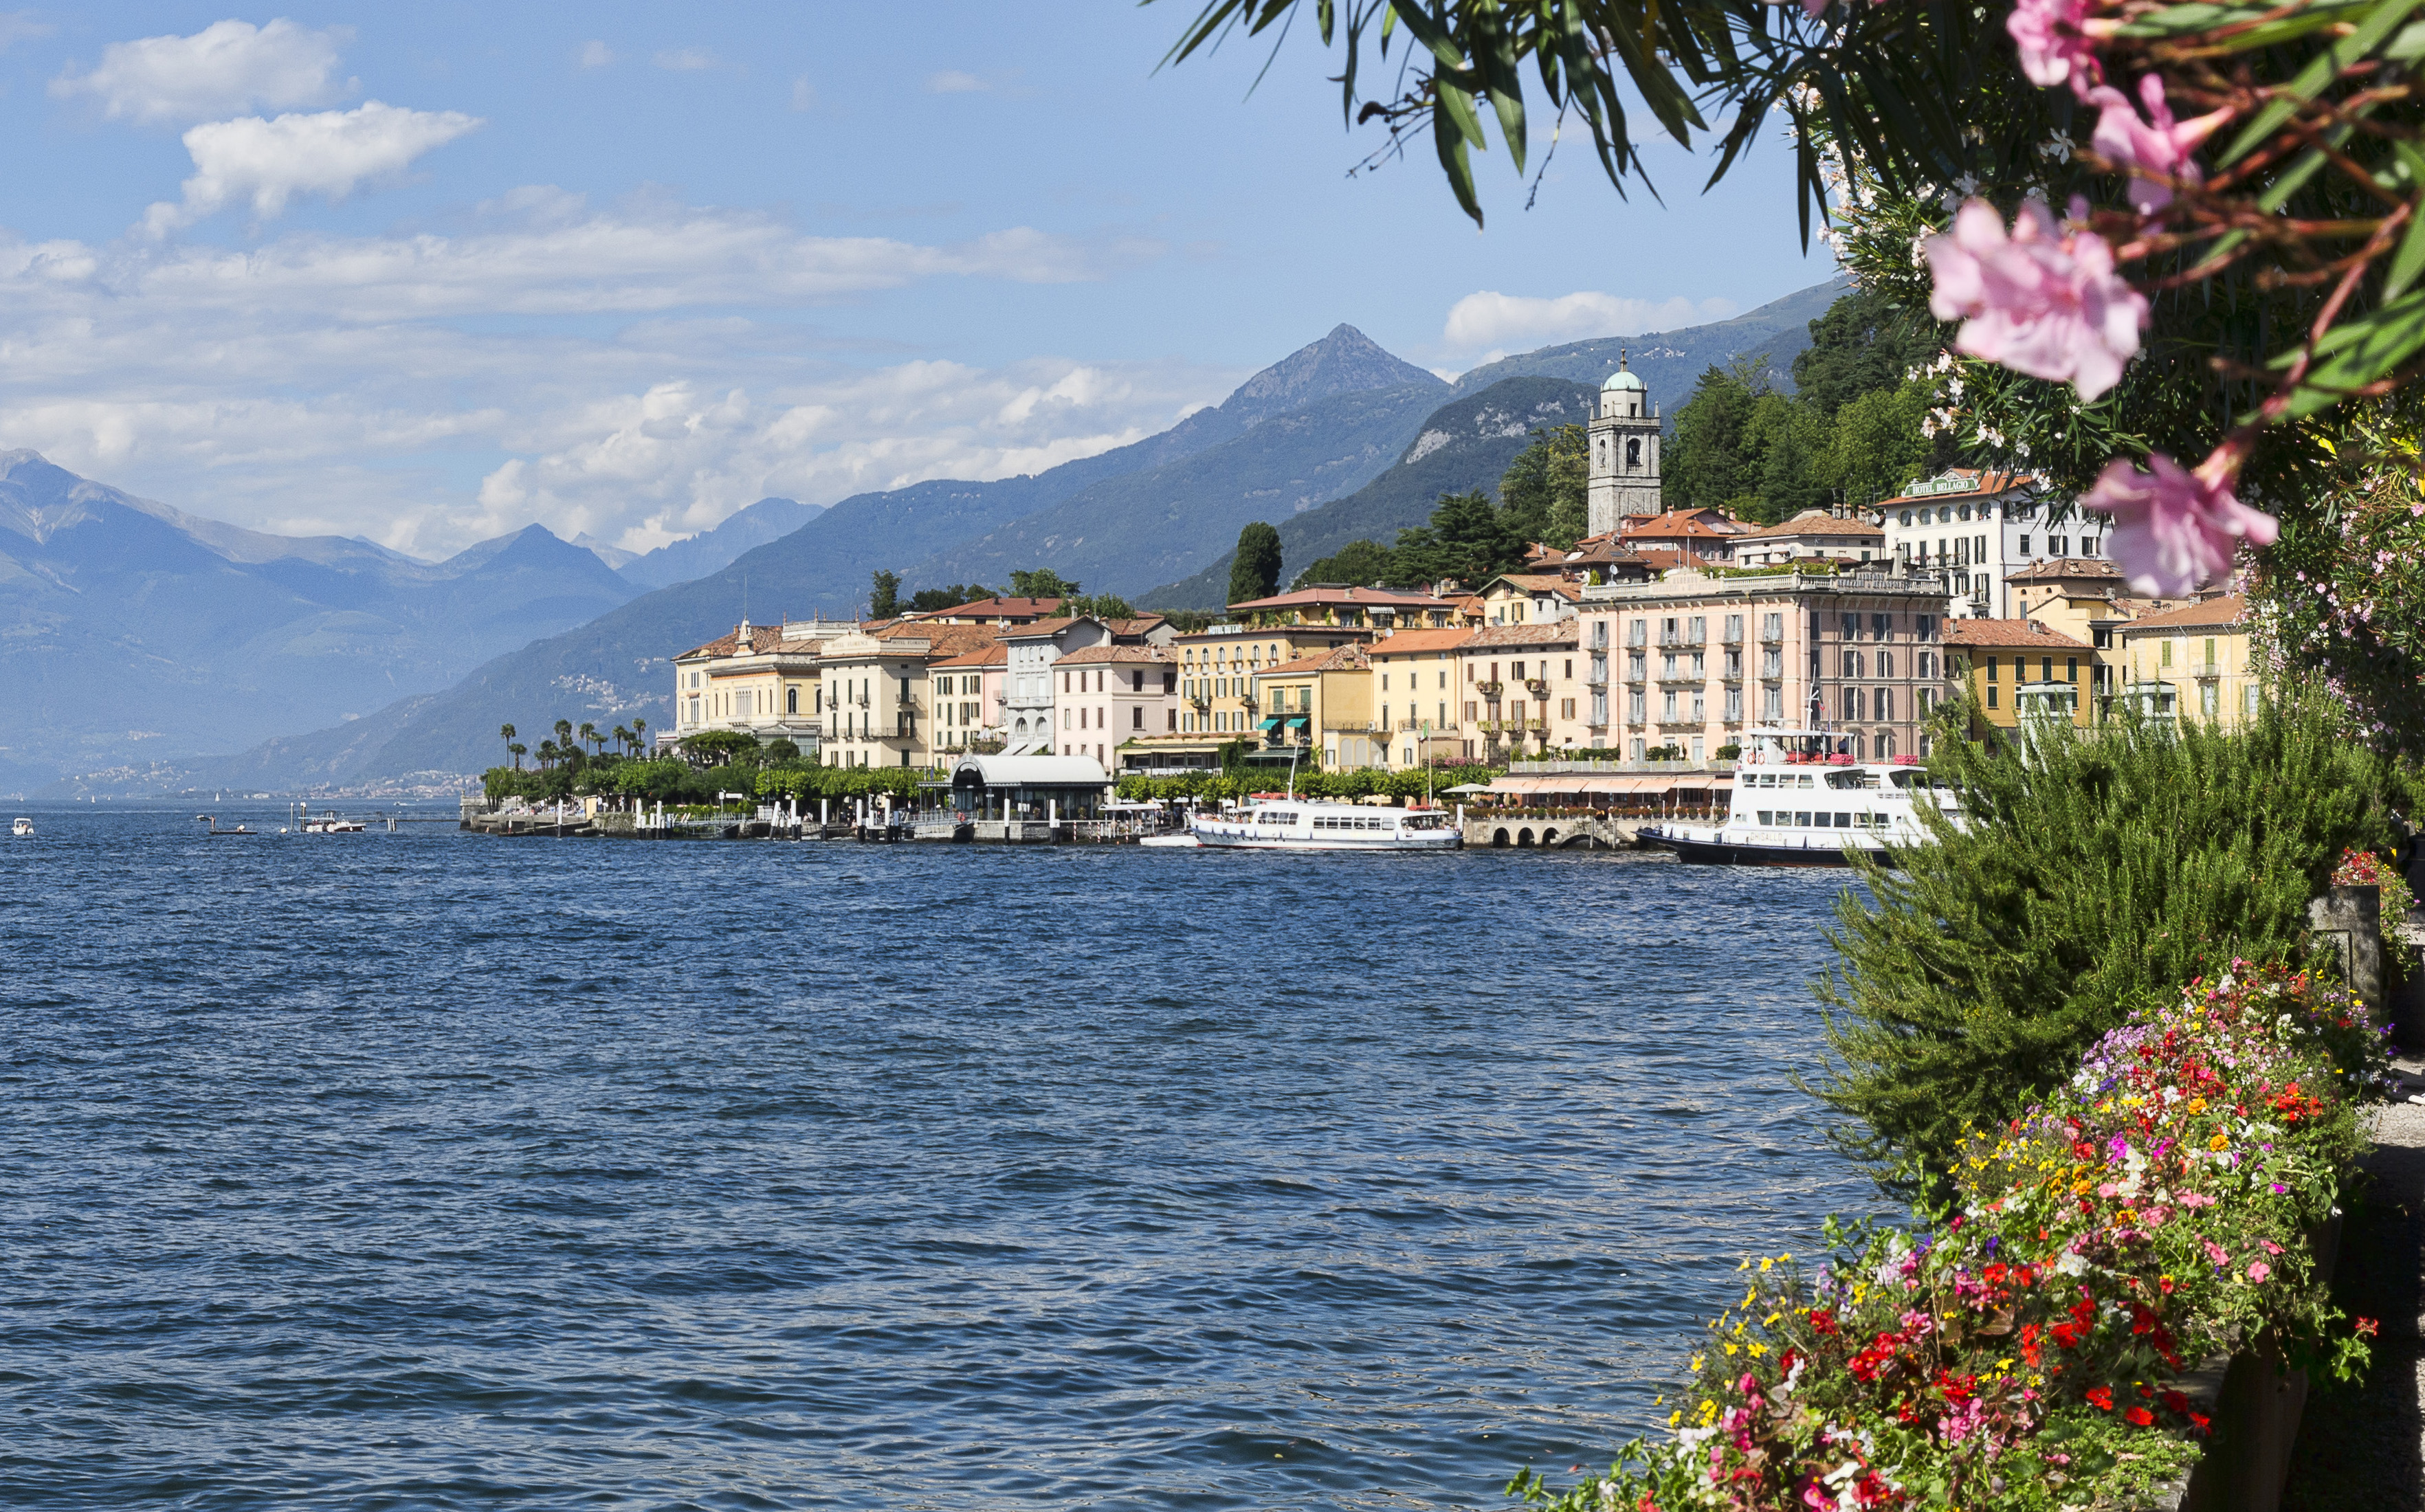 man made, town, bellagio, italy, lake como, lombardy, towns